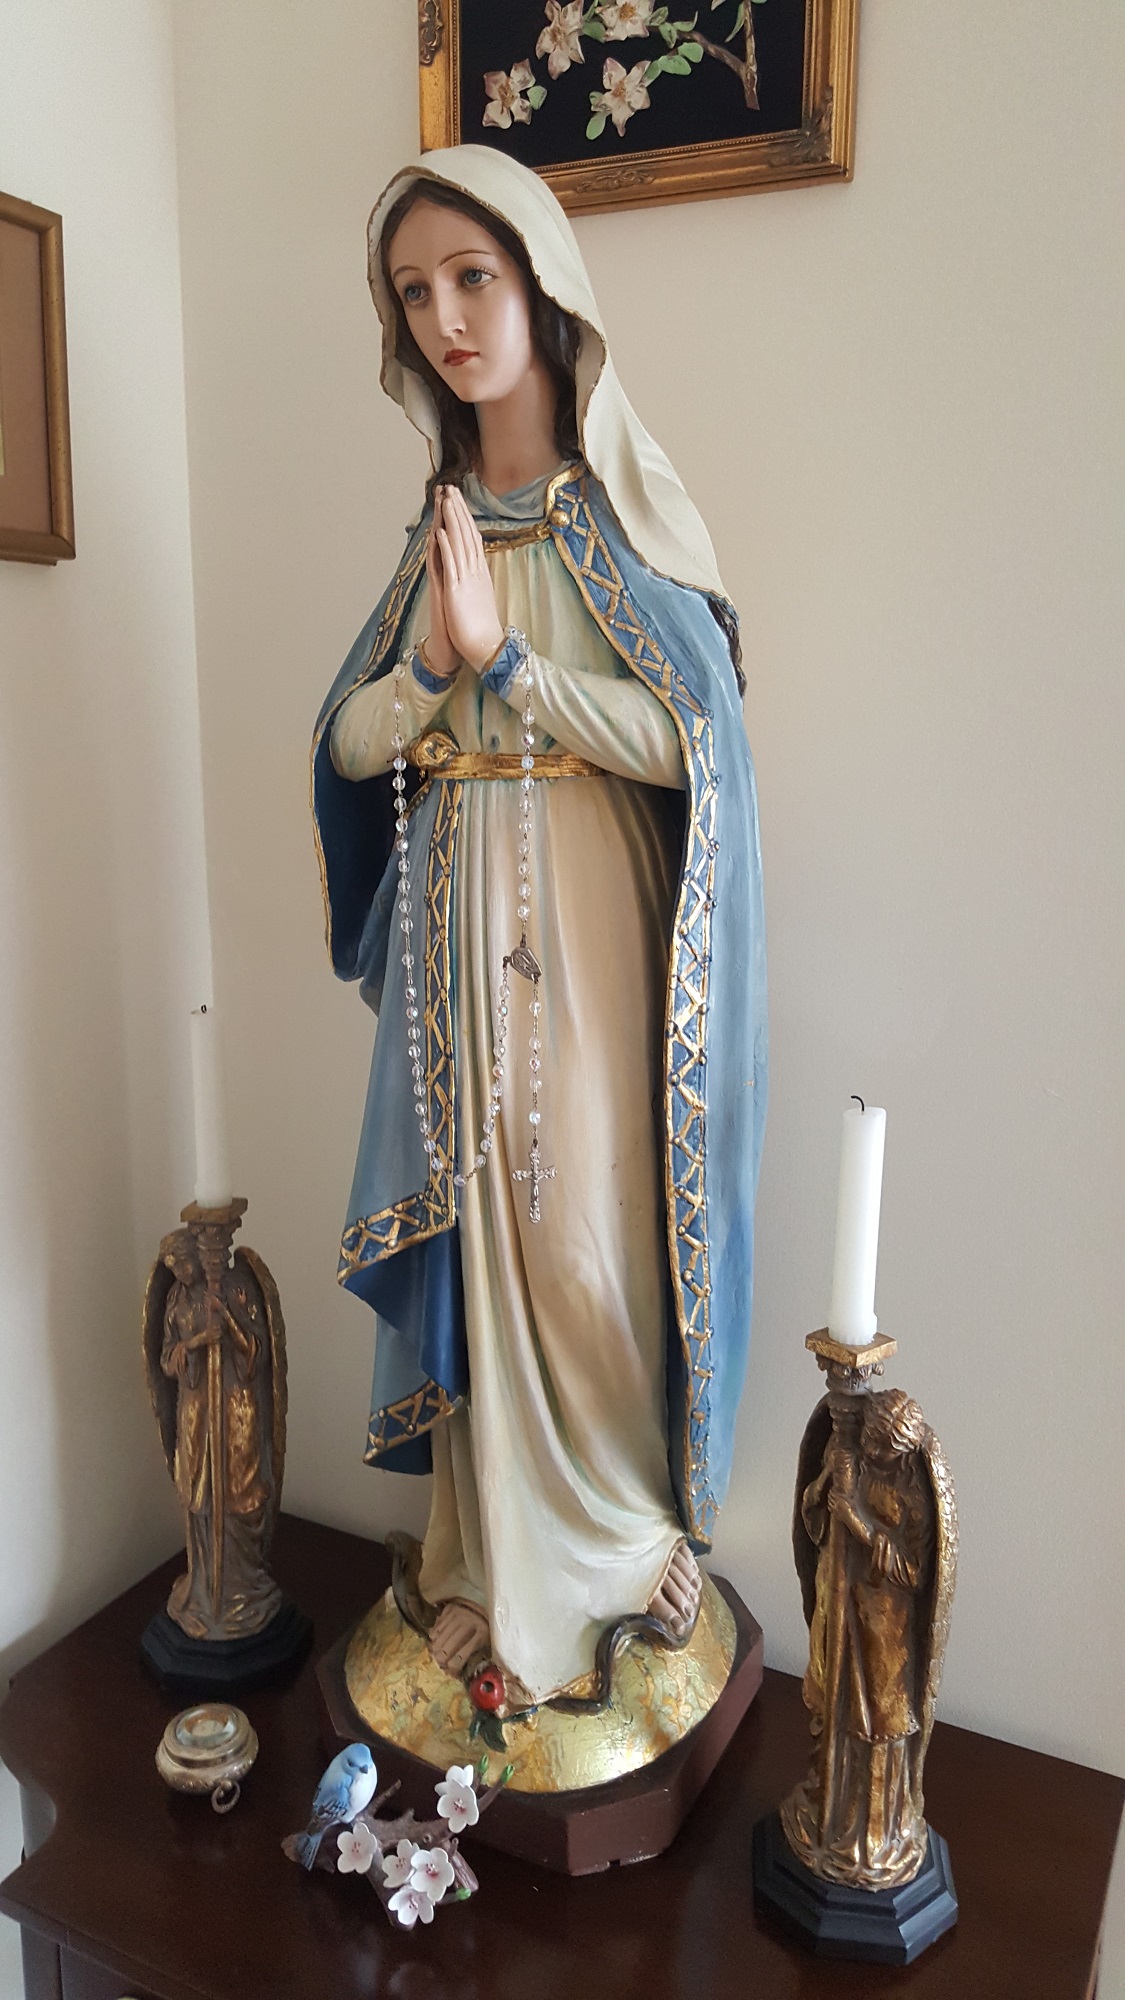 A statue of Our Lady in the bishop's home chapel that he rescued and had restored. It was hugged by Mother Teresa.